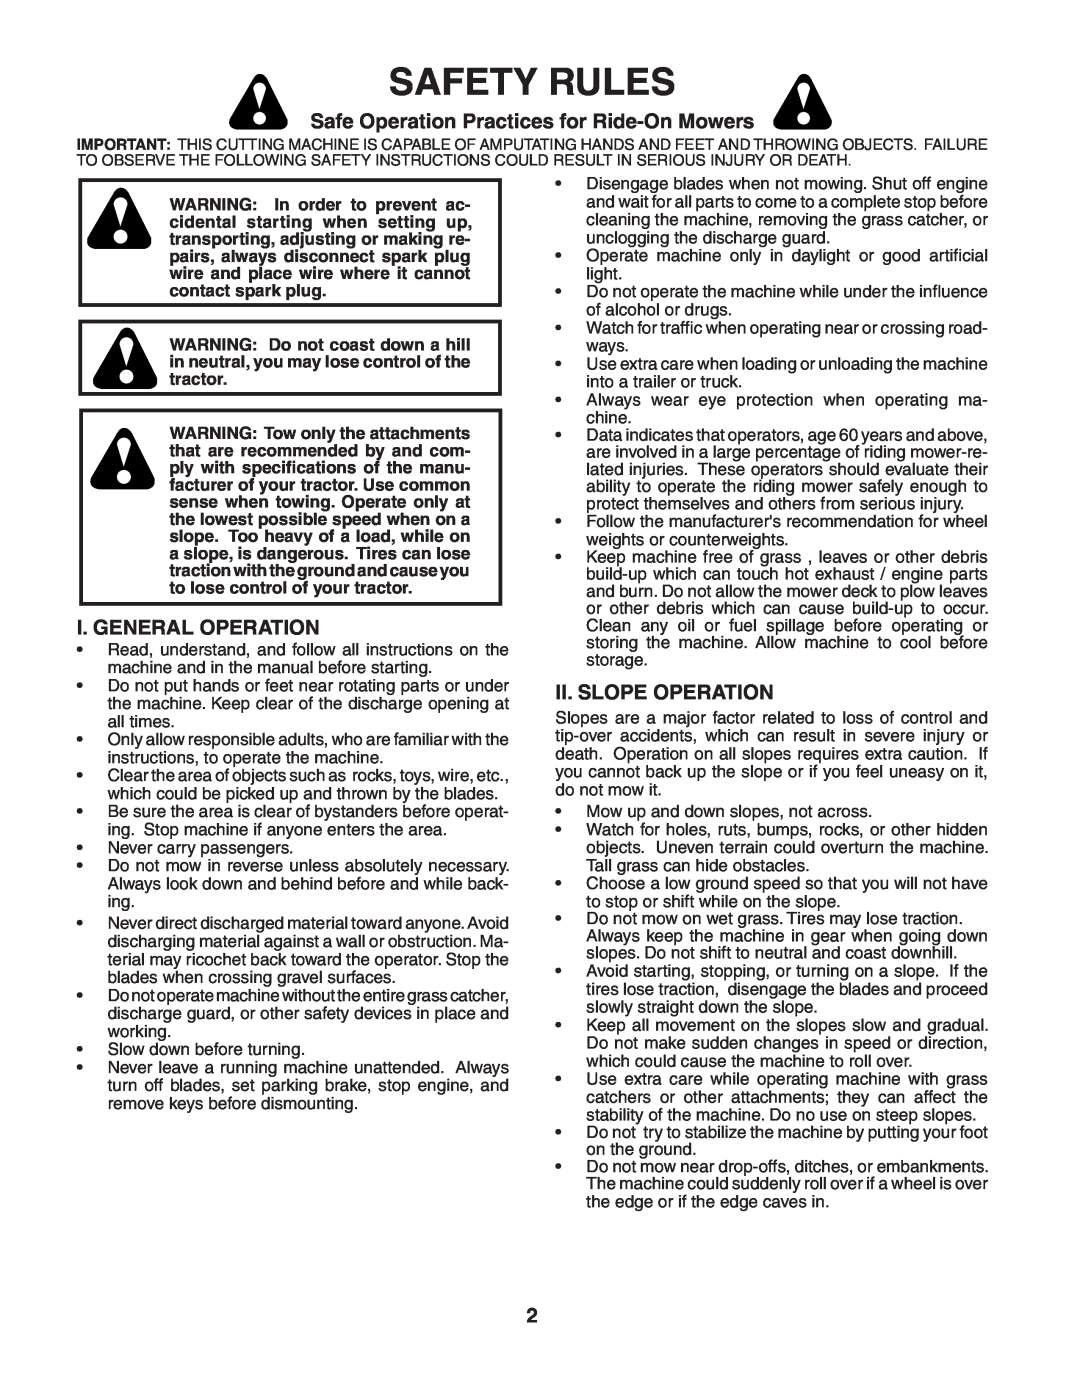 McCulloch MC1136 Safety Rules, Safe Operation Practices for Ride-On Mowers, I. General Operation, Ii. Slope Operation 